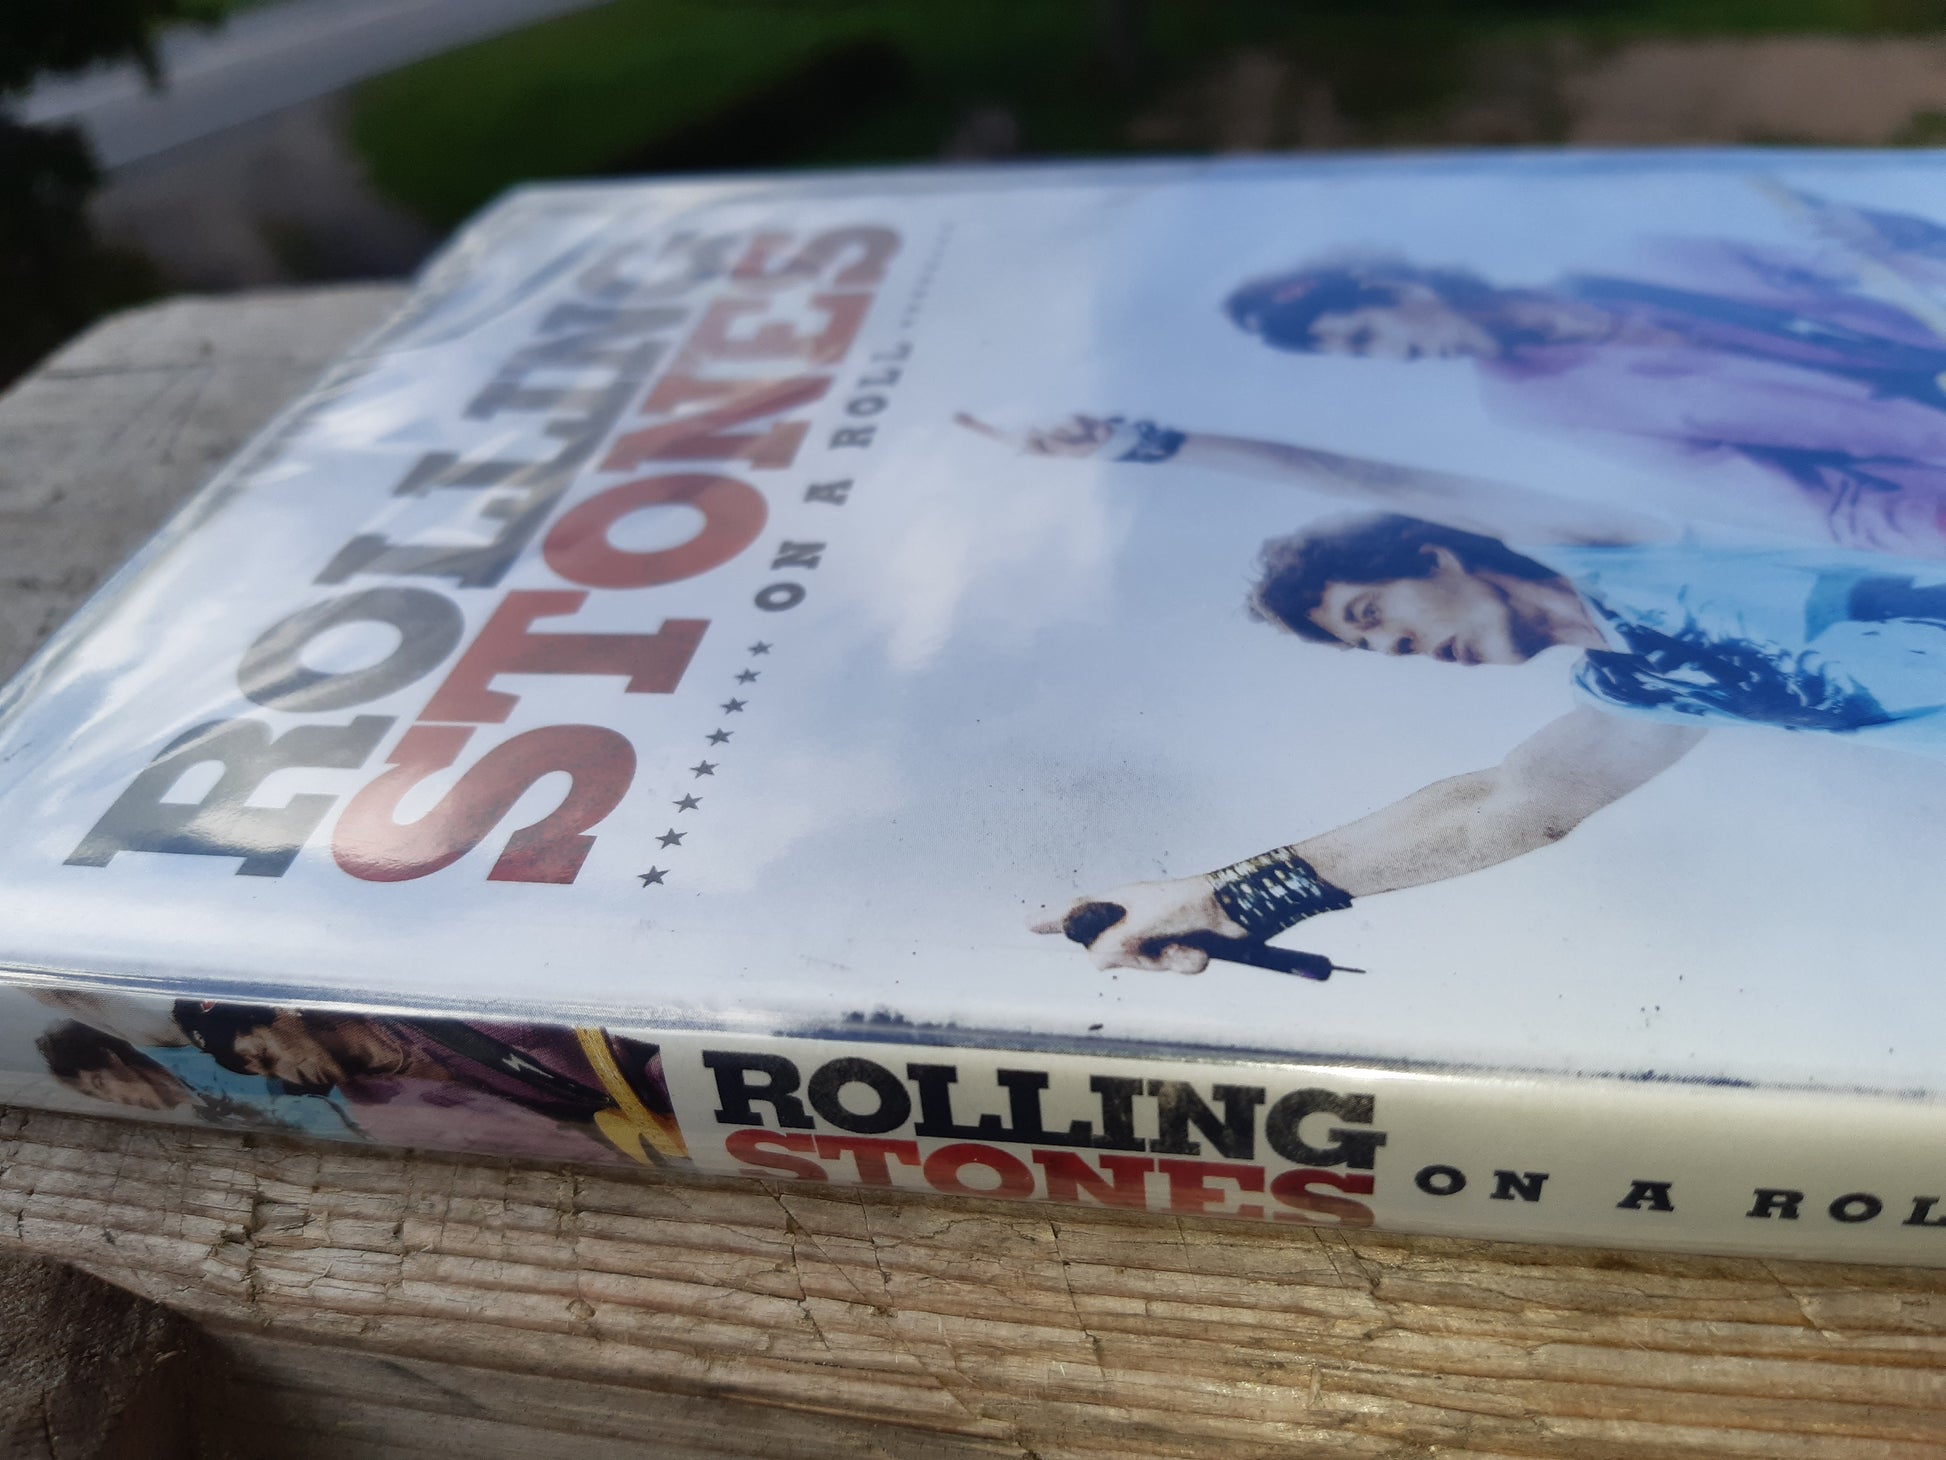 rolling stones - on a roll - dvd